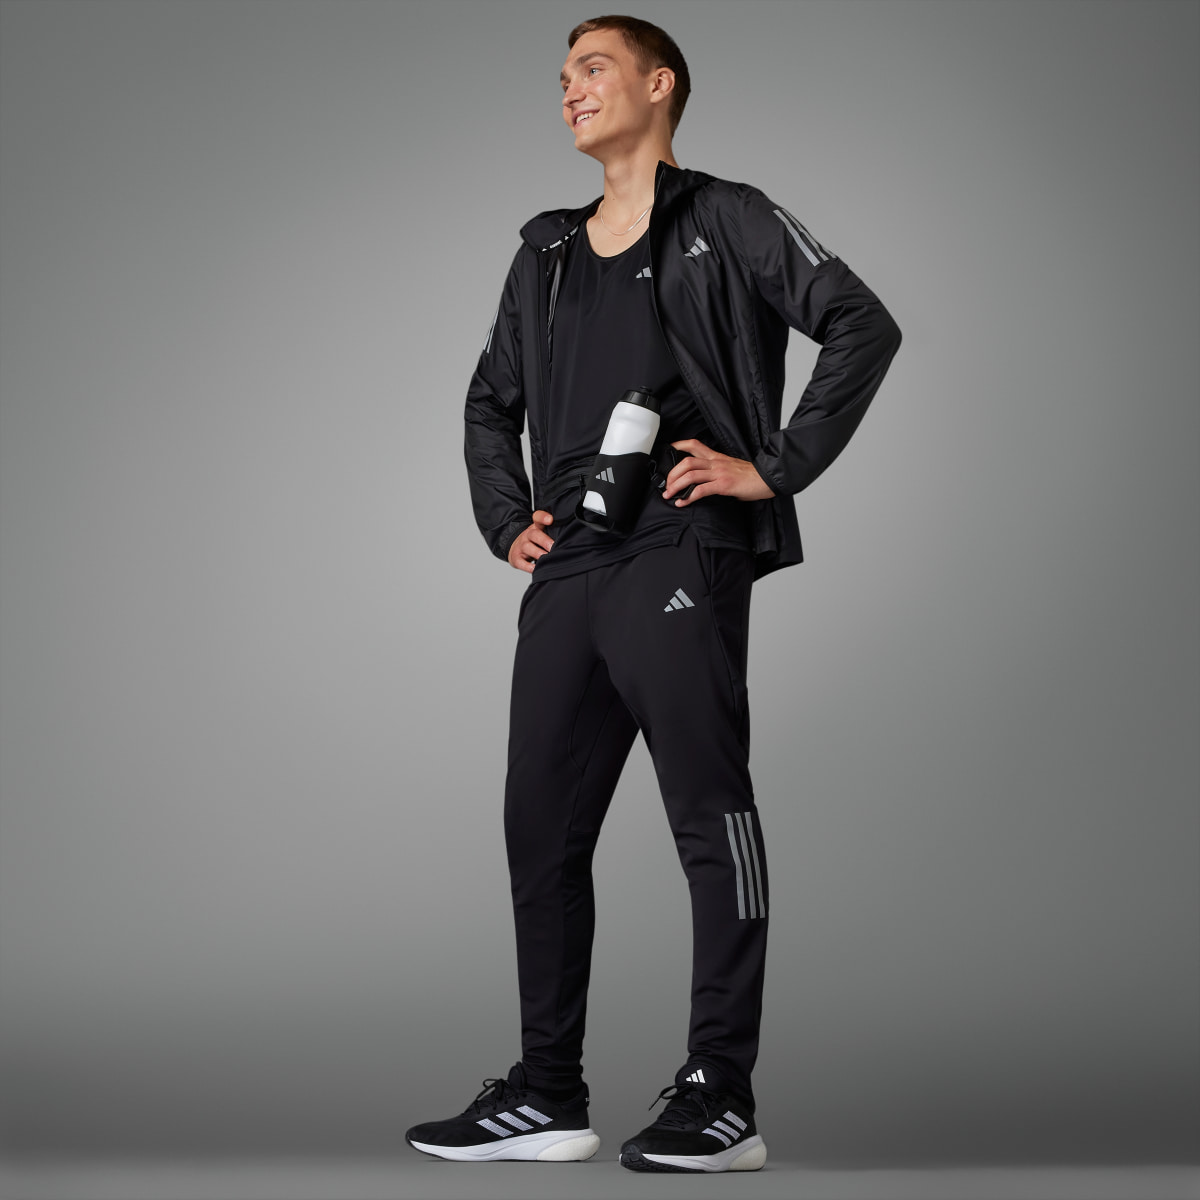 Adidas Own the Run Astro Knit Pants. 10